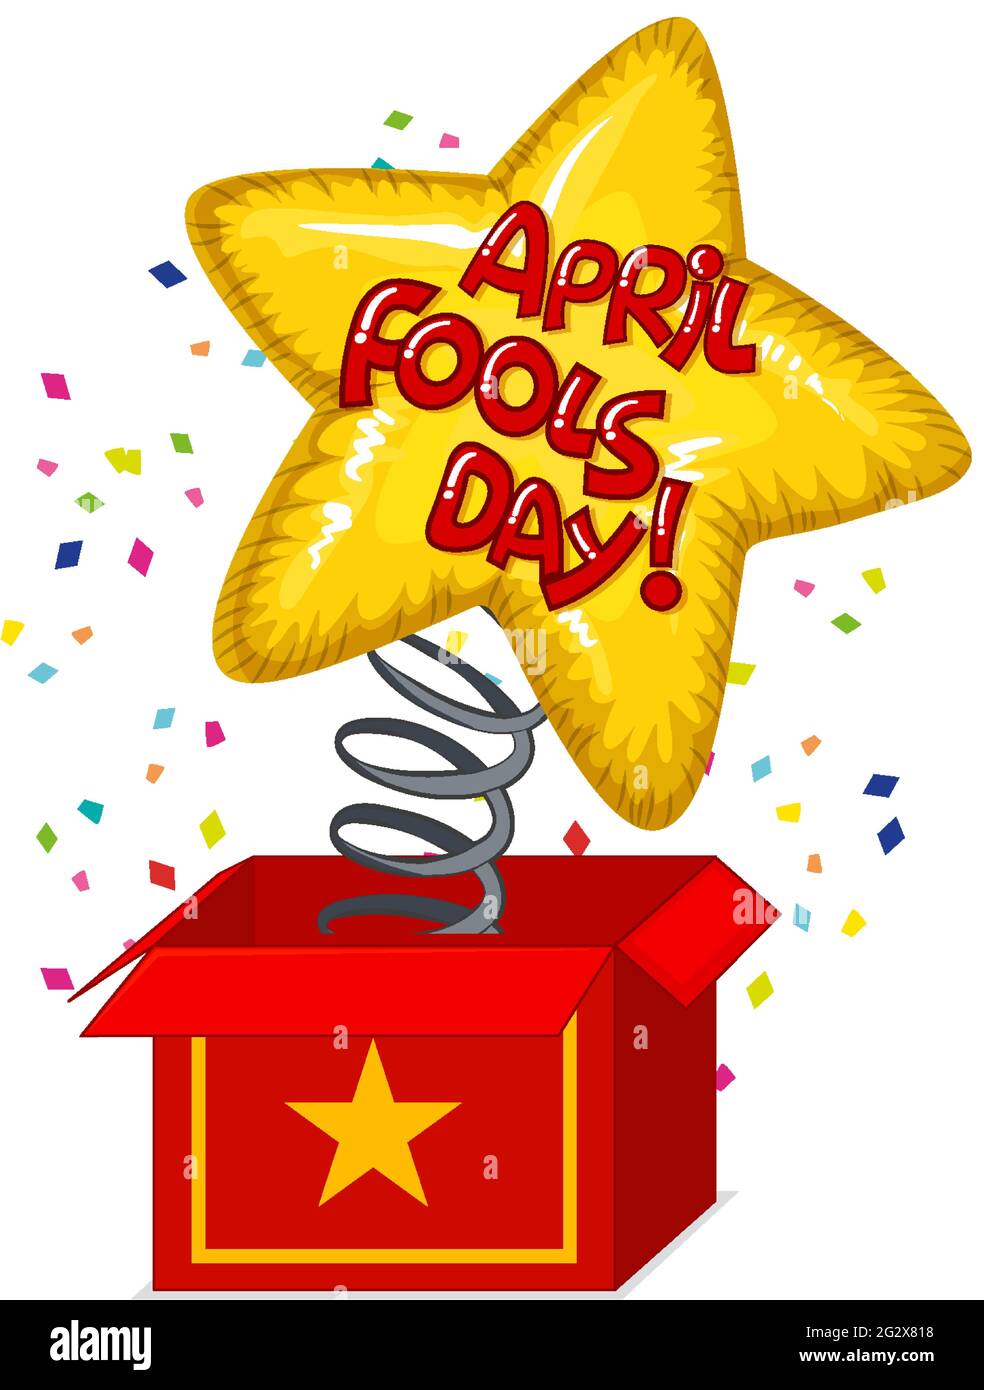 April Fool's Day font logo with confetti explosion illustration Stock Vector